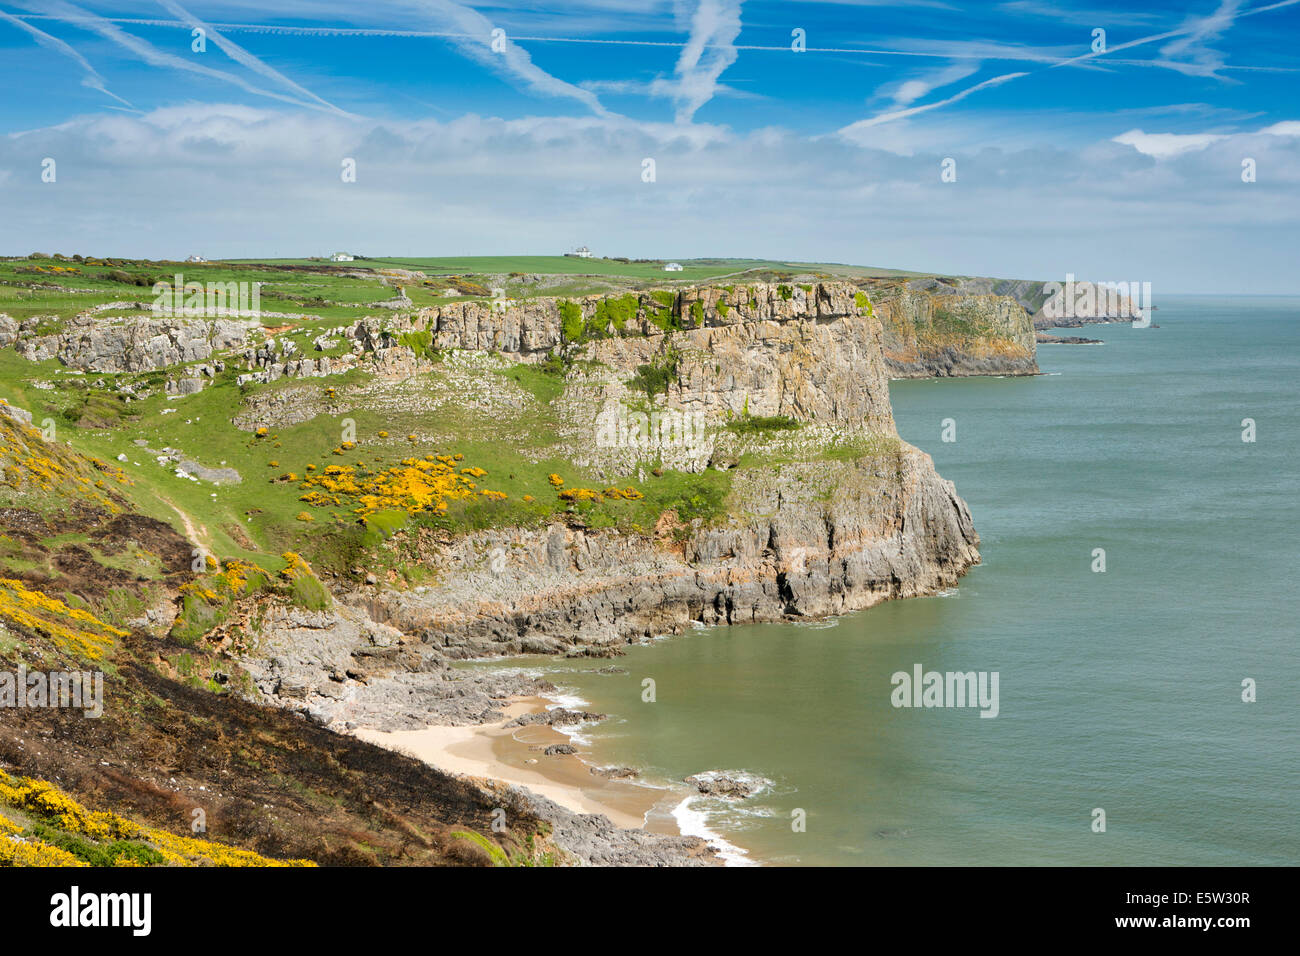 Royaume-uni, Pays de Galles, Swansea, Gower, Rhossili, Middleton, Mewslade Bay Banque D'Images